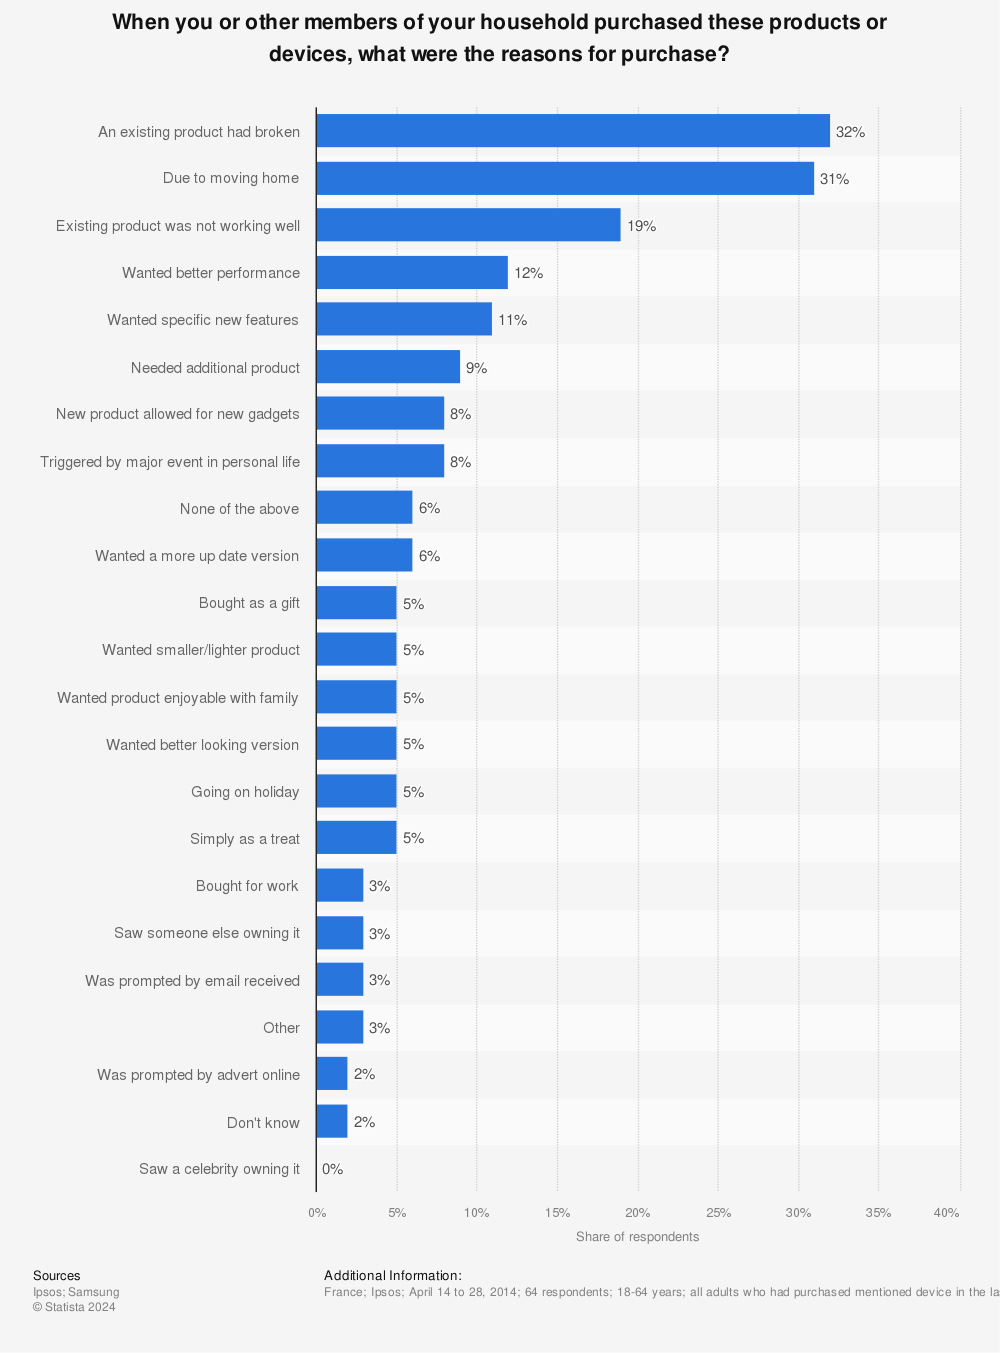 Statistic: When you or other members of your household purchased these products or devices, what were the reasons for purchase? | Statista